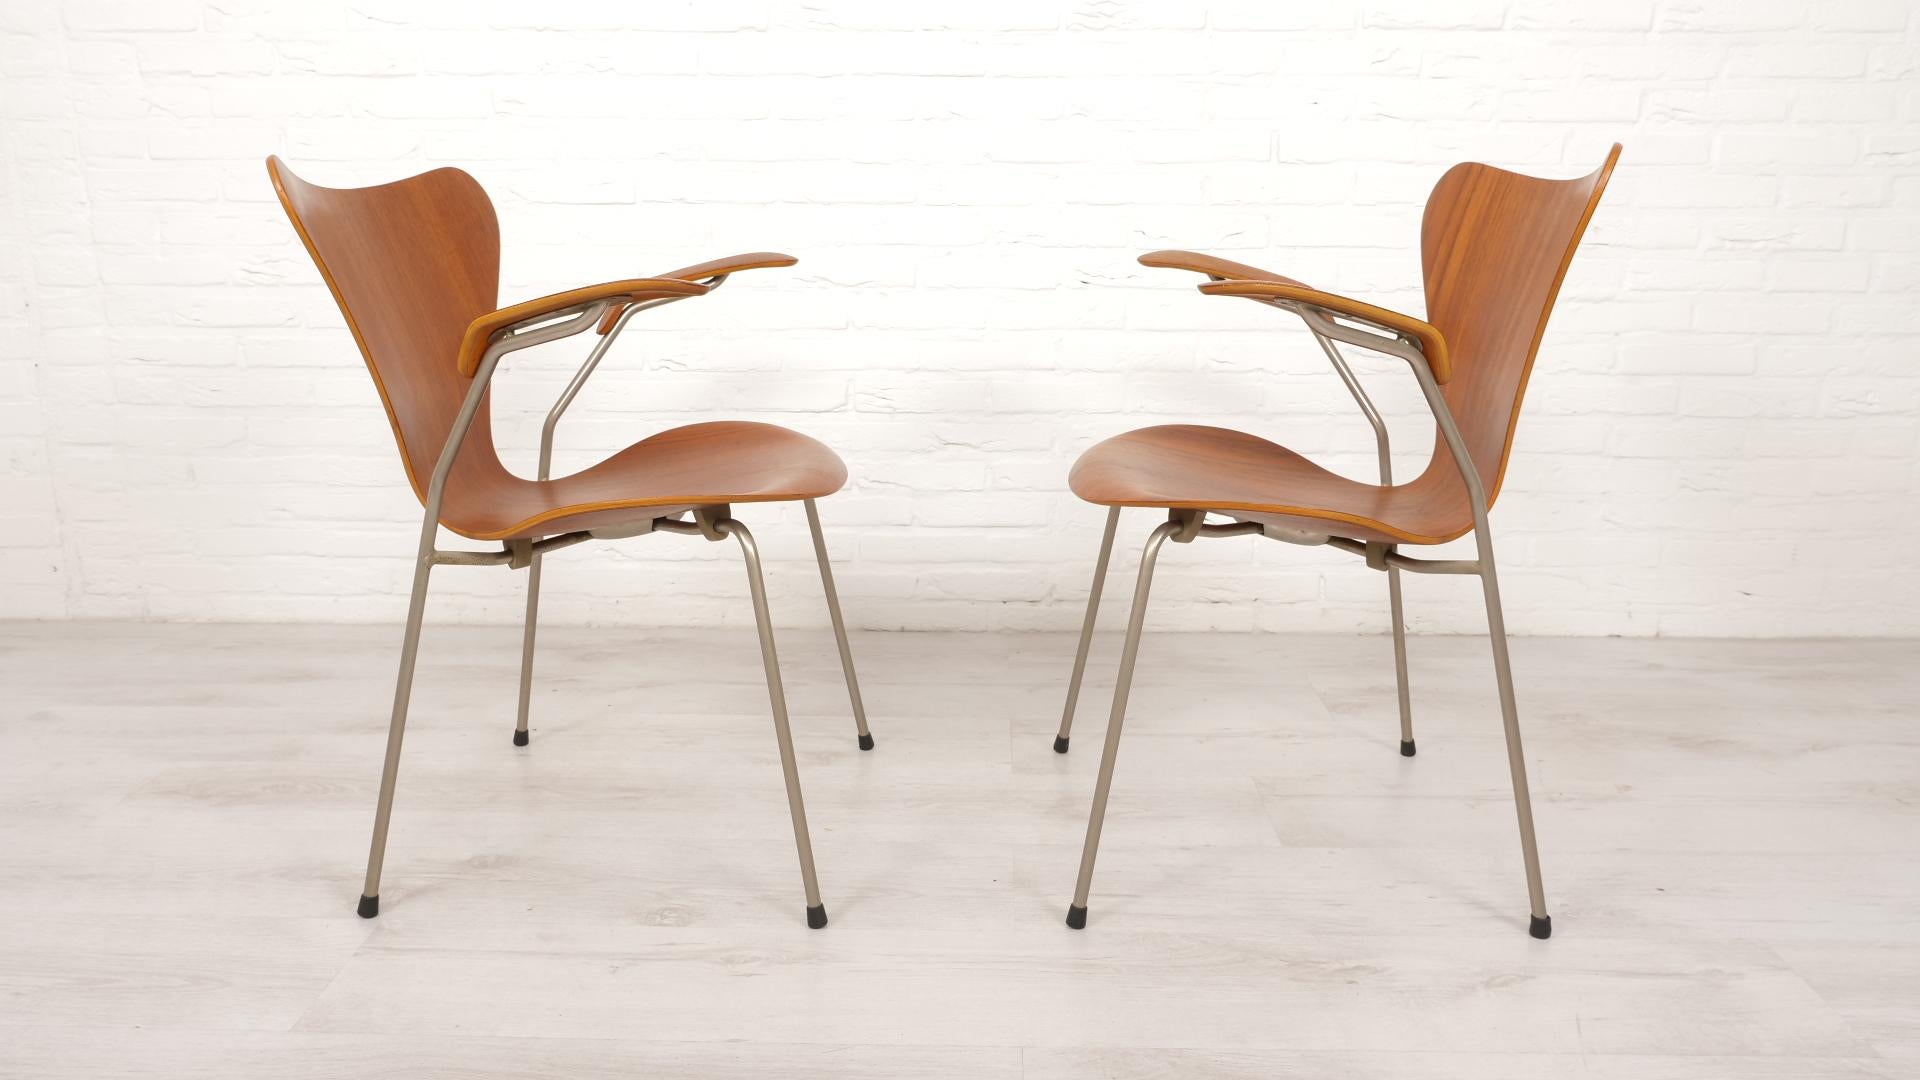 2 Vintage butterfly chairs with armrests by Arne Jacobsen model 3207 Teak 5